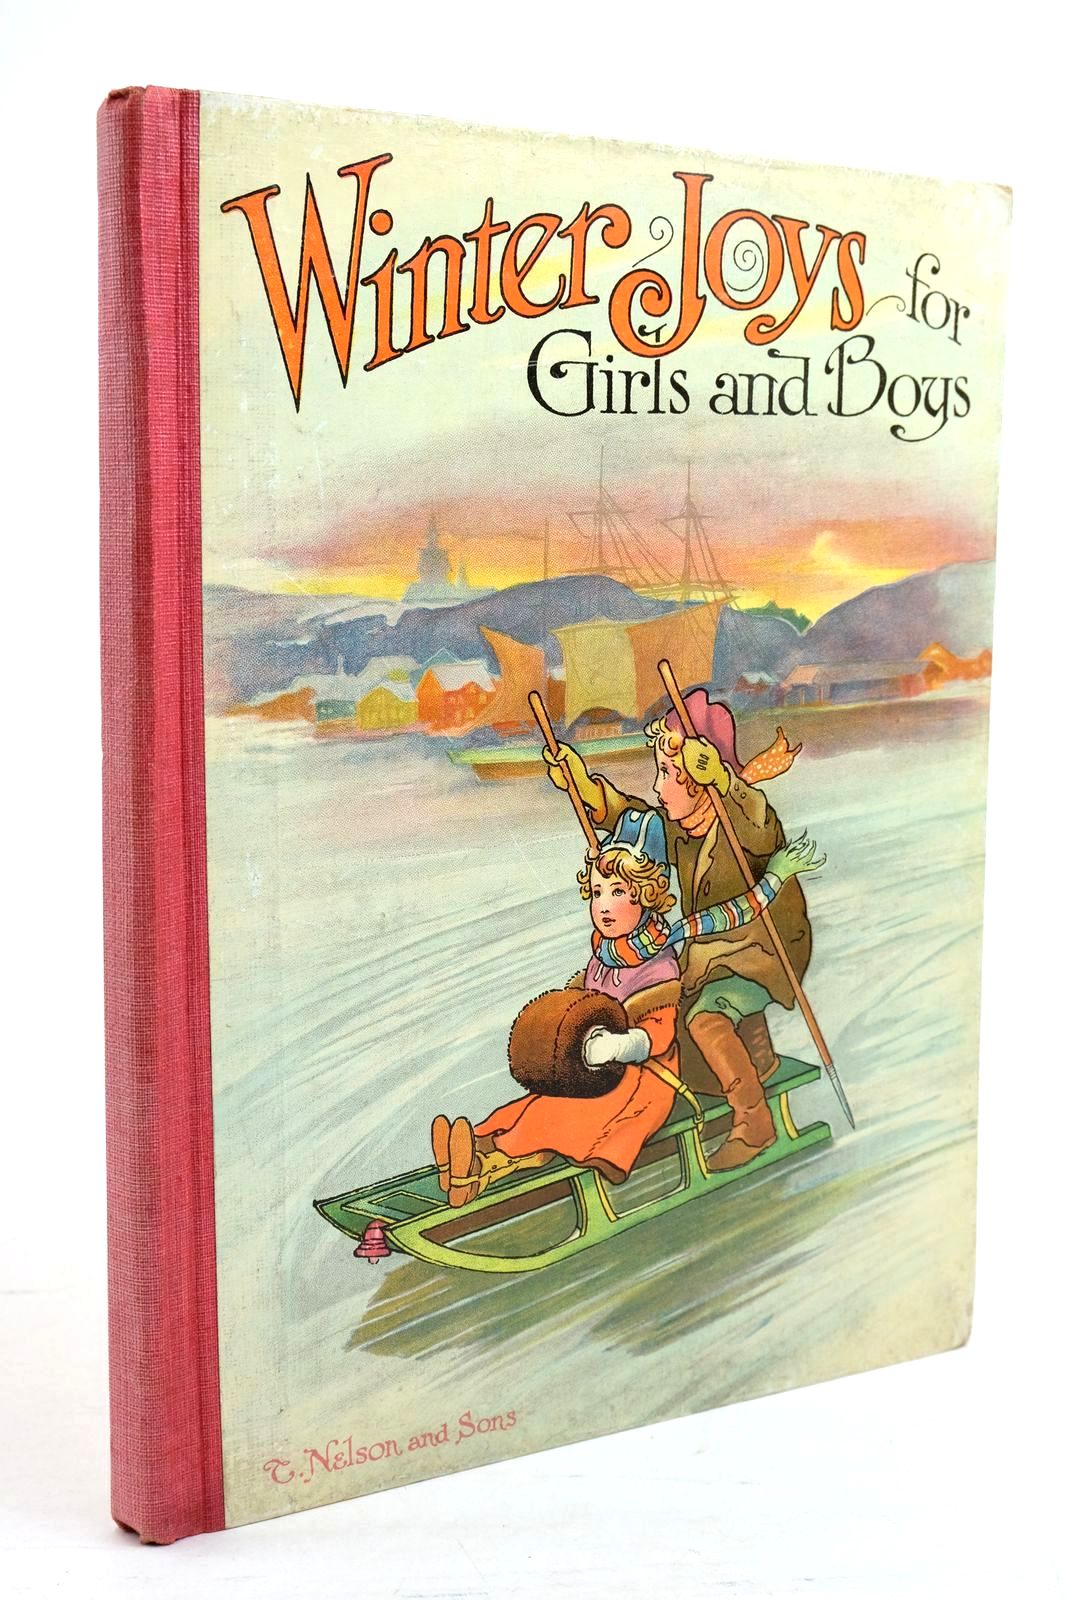 Photo of WINTER JOYS FOR GIRLS AND BOYS illustrated by Hassall, John
Lance, E.
et al.,  published by Thomas Nelson & Sons (STOCK CODE: 1320793)  for sale by Stella & Rose's Books